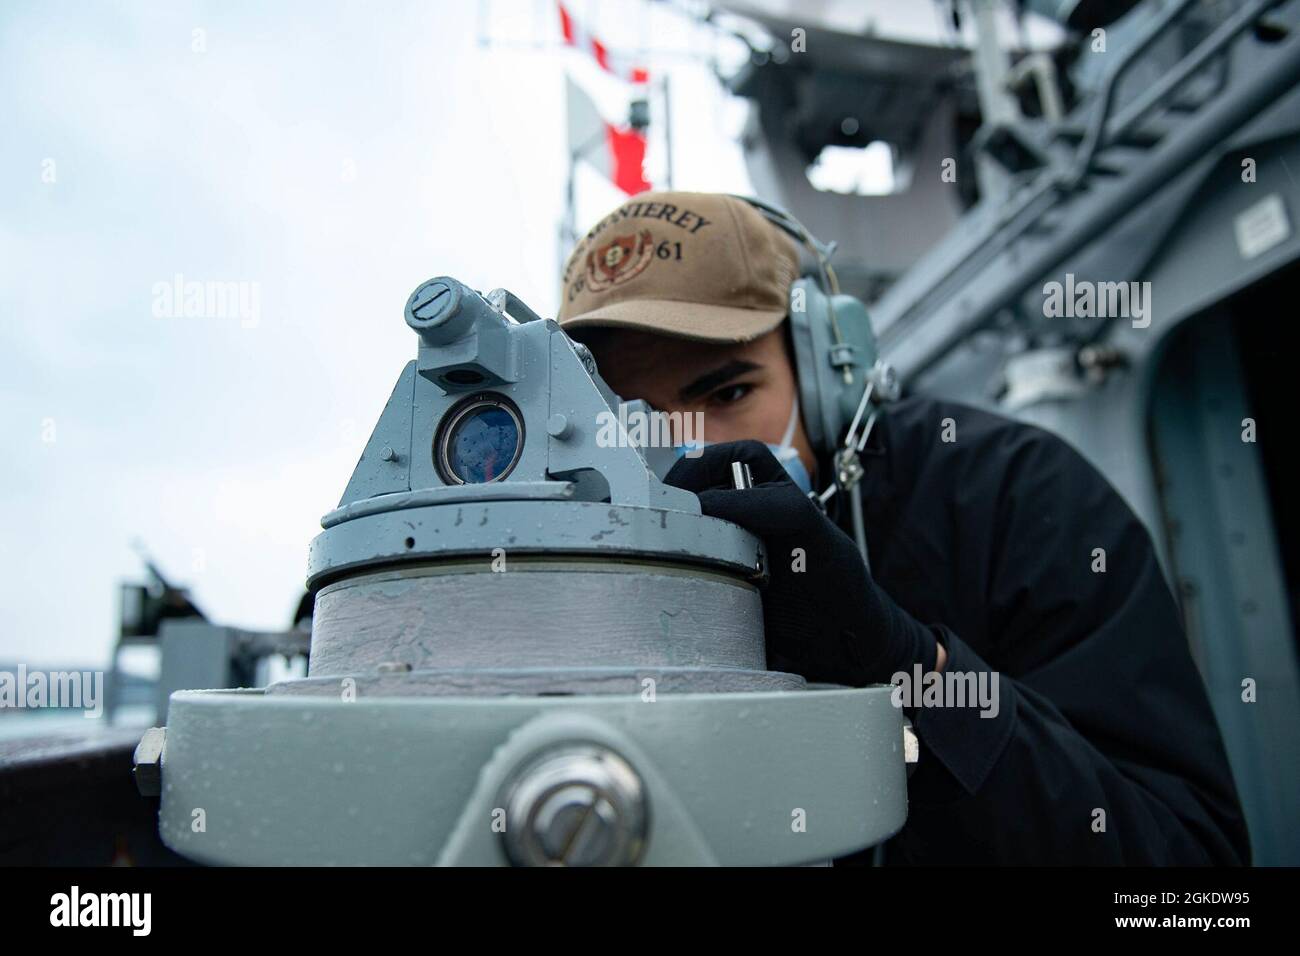 210324-N-WQ732-1020 MEDITERRANEAN SEA (March 24, 2021) Quartermaster 3rd Class Deion Palaez, from Miami, marks a bearing using a telescopic alidade as the Ticonderoga-class guided-missile cruiser USS Monterey (CG 61) transits the Mediterranean Sea, March 24, 2021.  Monterey is operating with the IKE Carrier Strike Group on a routine deployment in the U.S. Sixth Fleet area of operations in support of U.S. national interests and security in Europe and Africa. Stock Photo